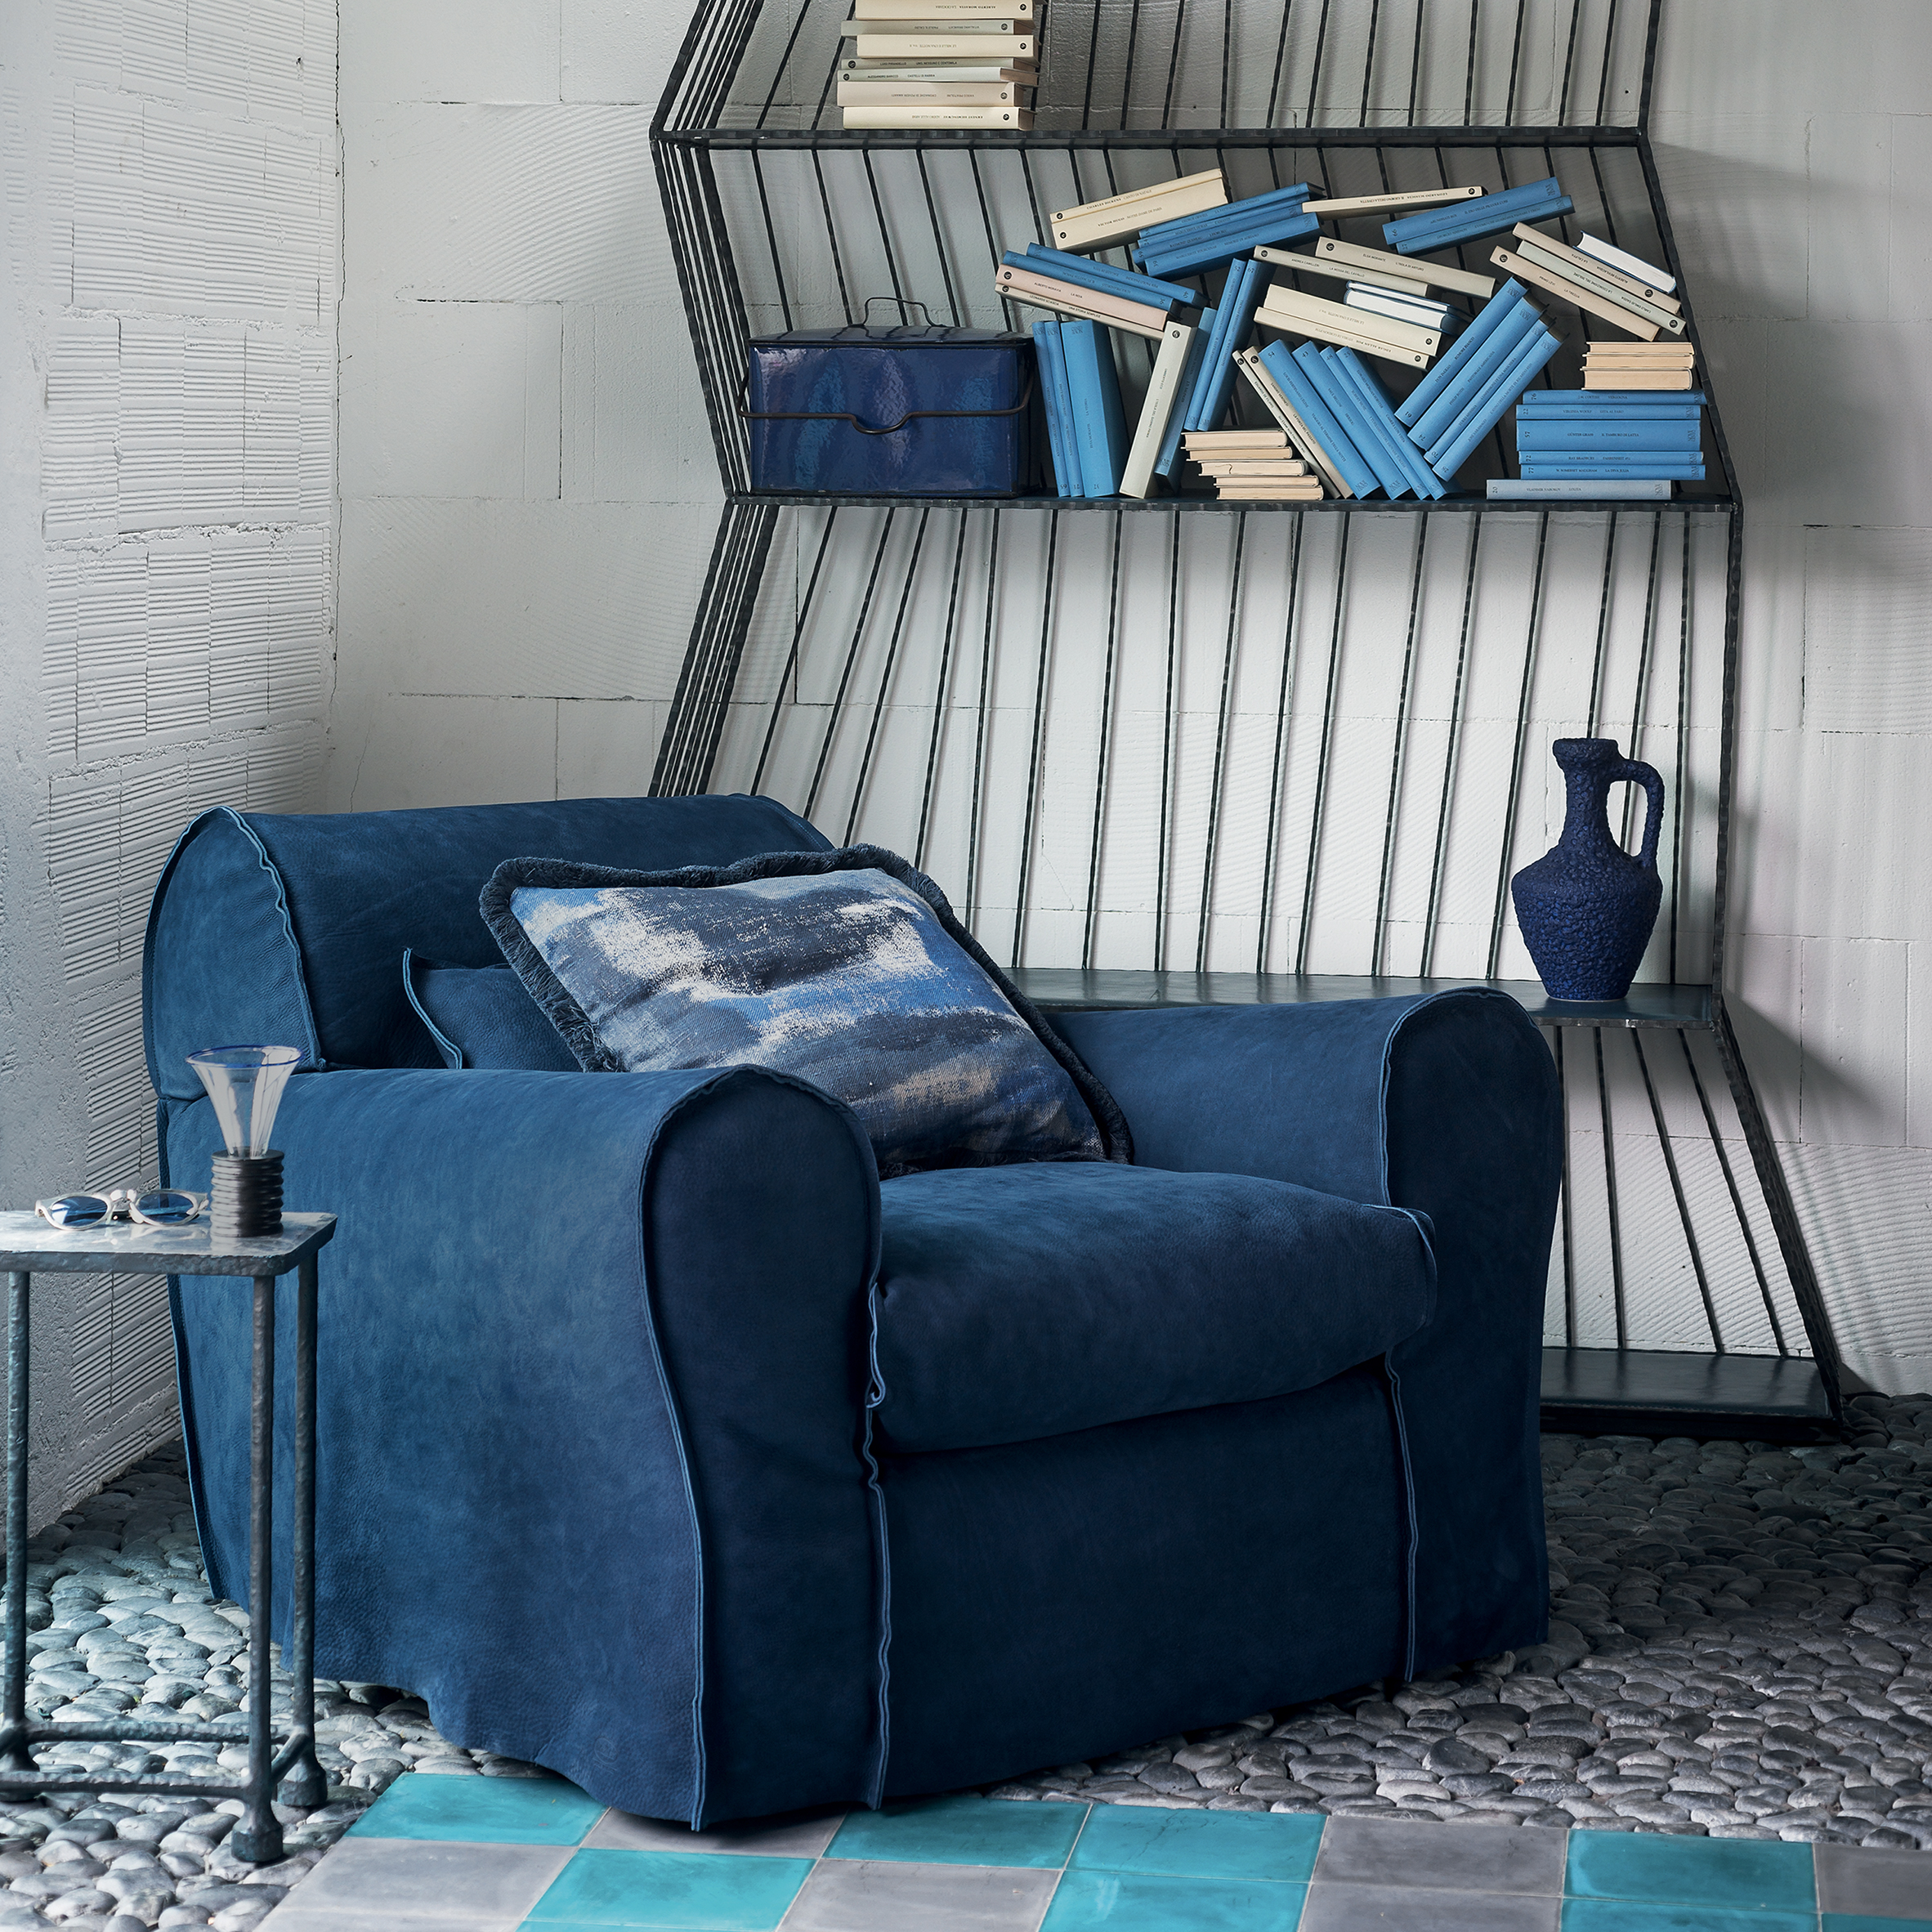 Baxter by Paola Navone 